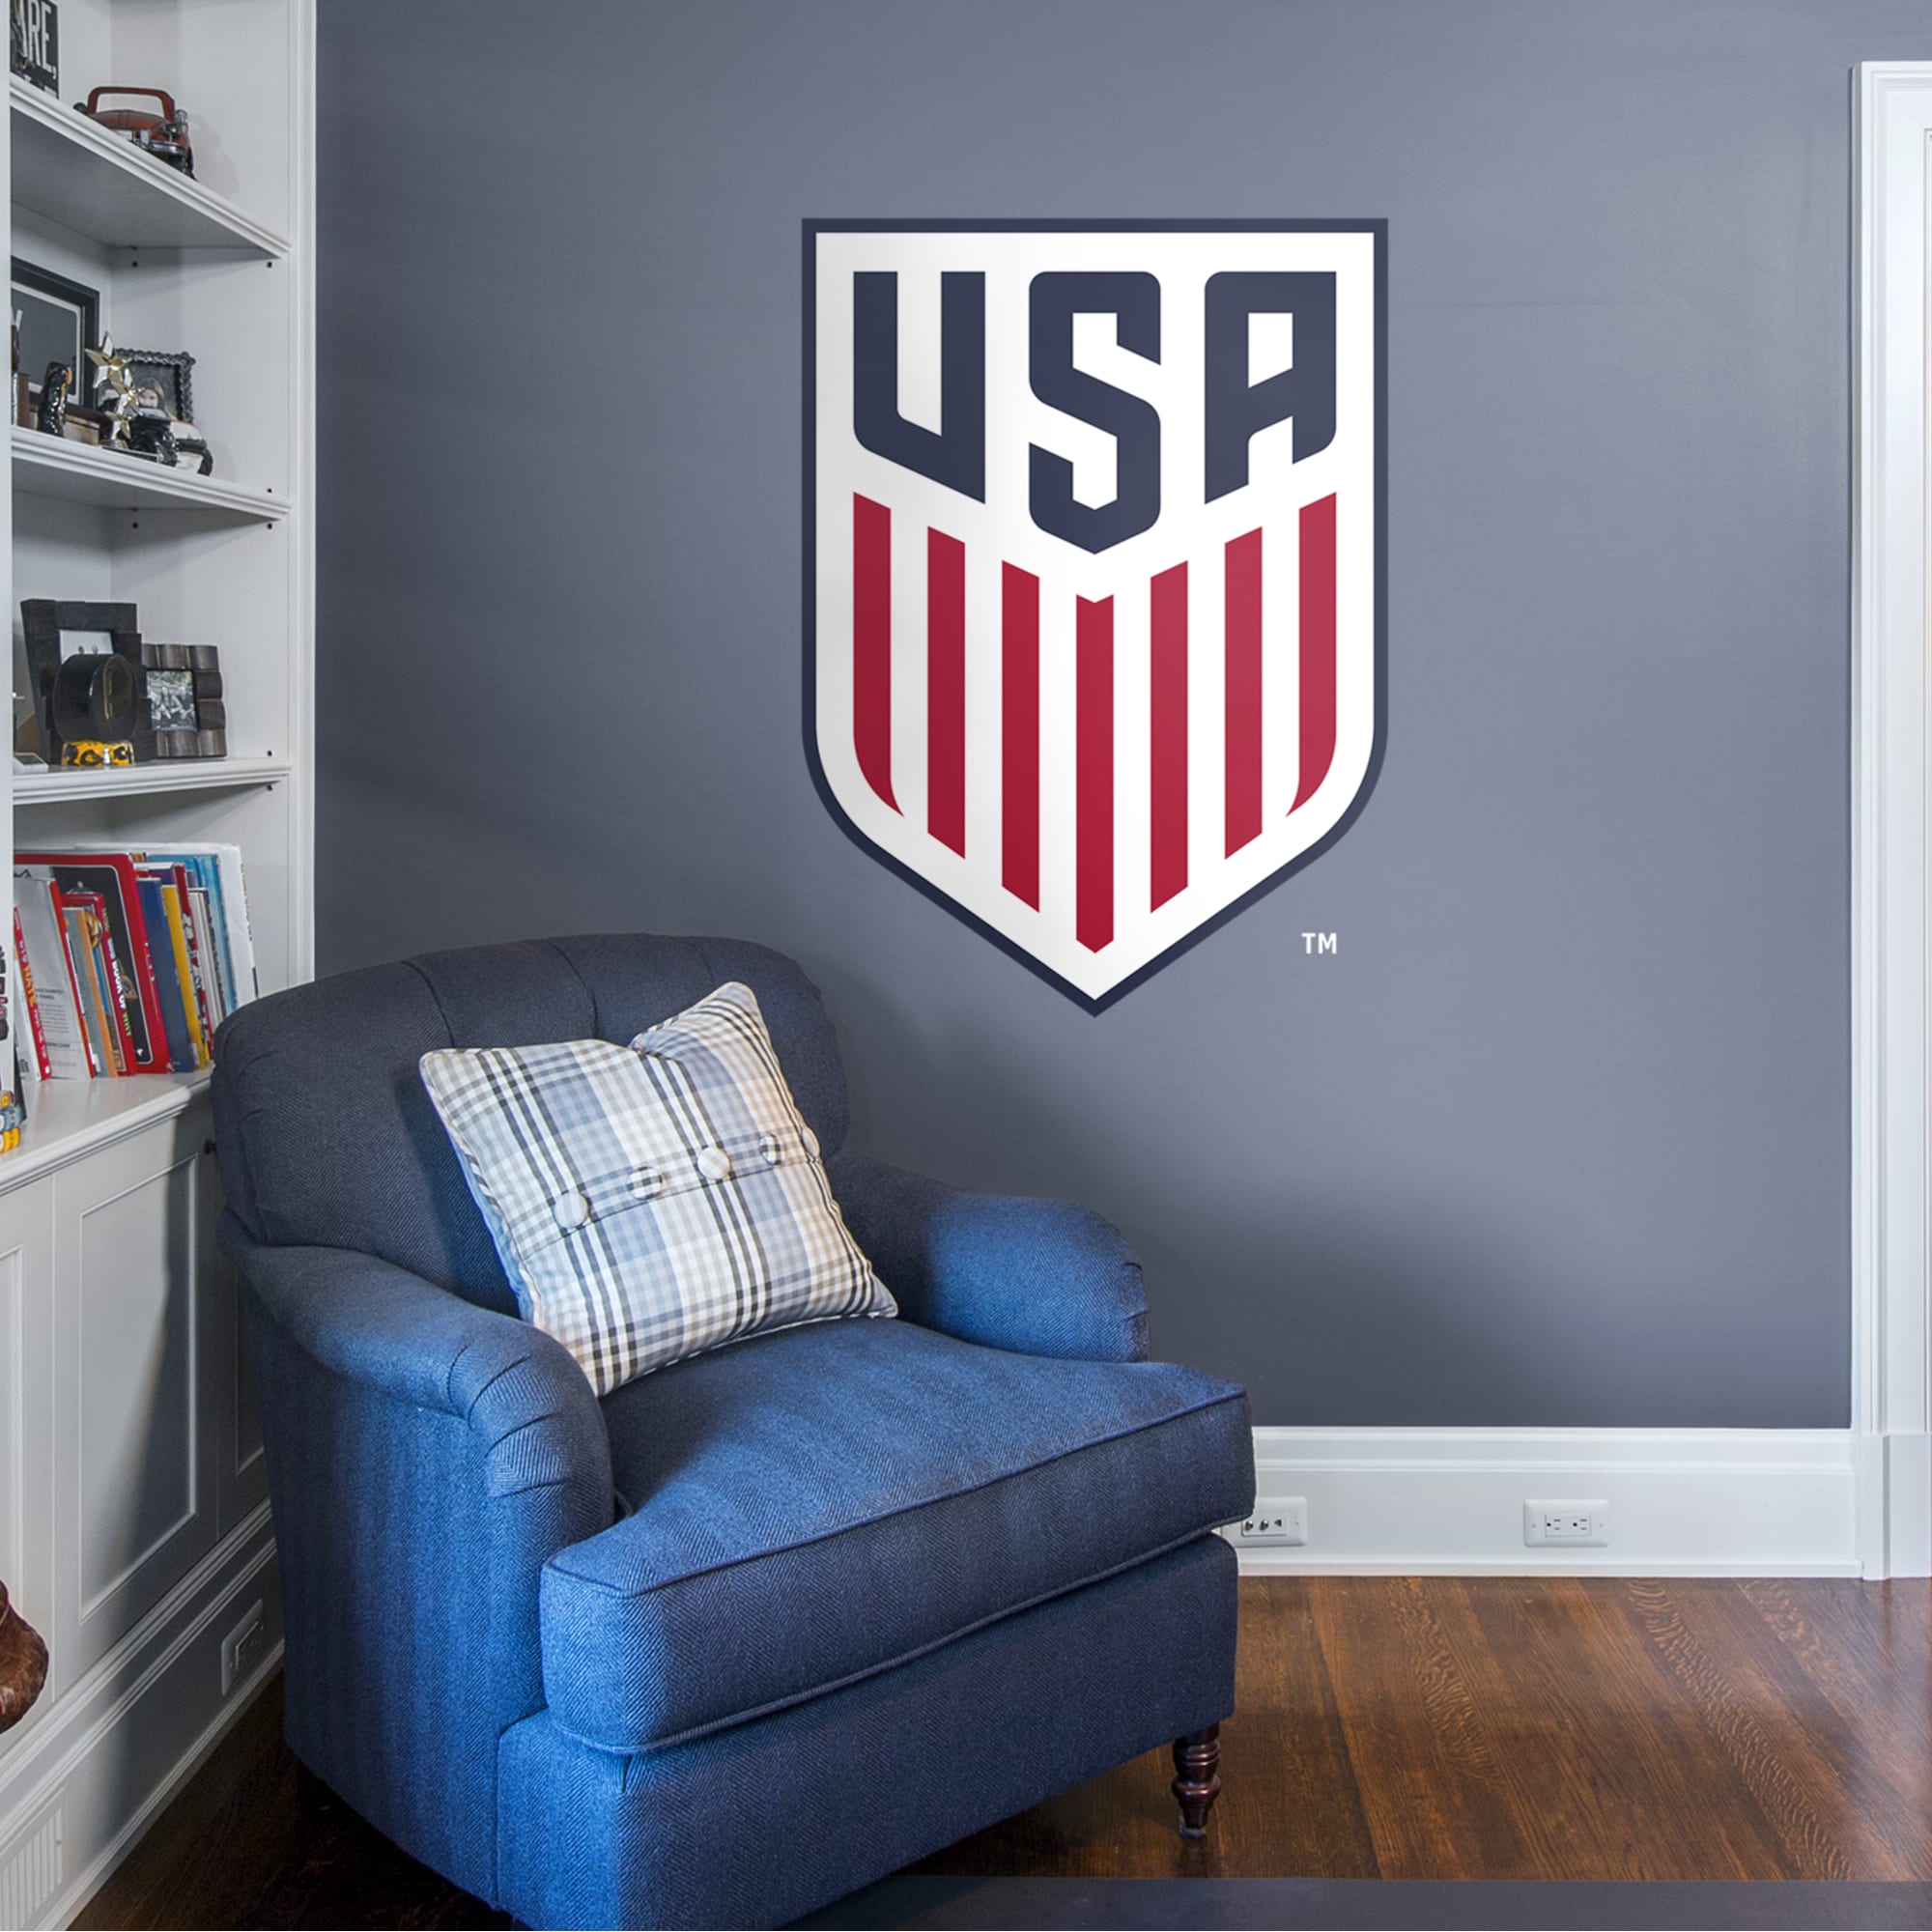 US Soccer: Mens National Team Crest - Officially Licensed Removable Wall Decal by Fathead | Vinyl